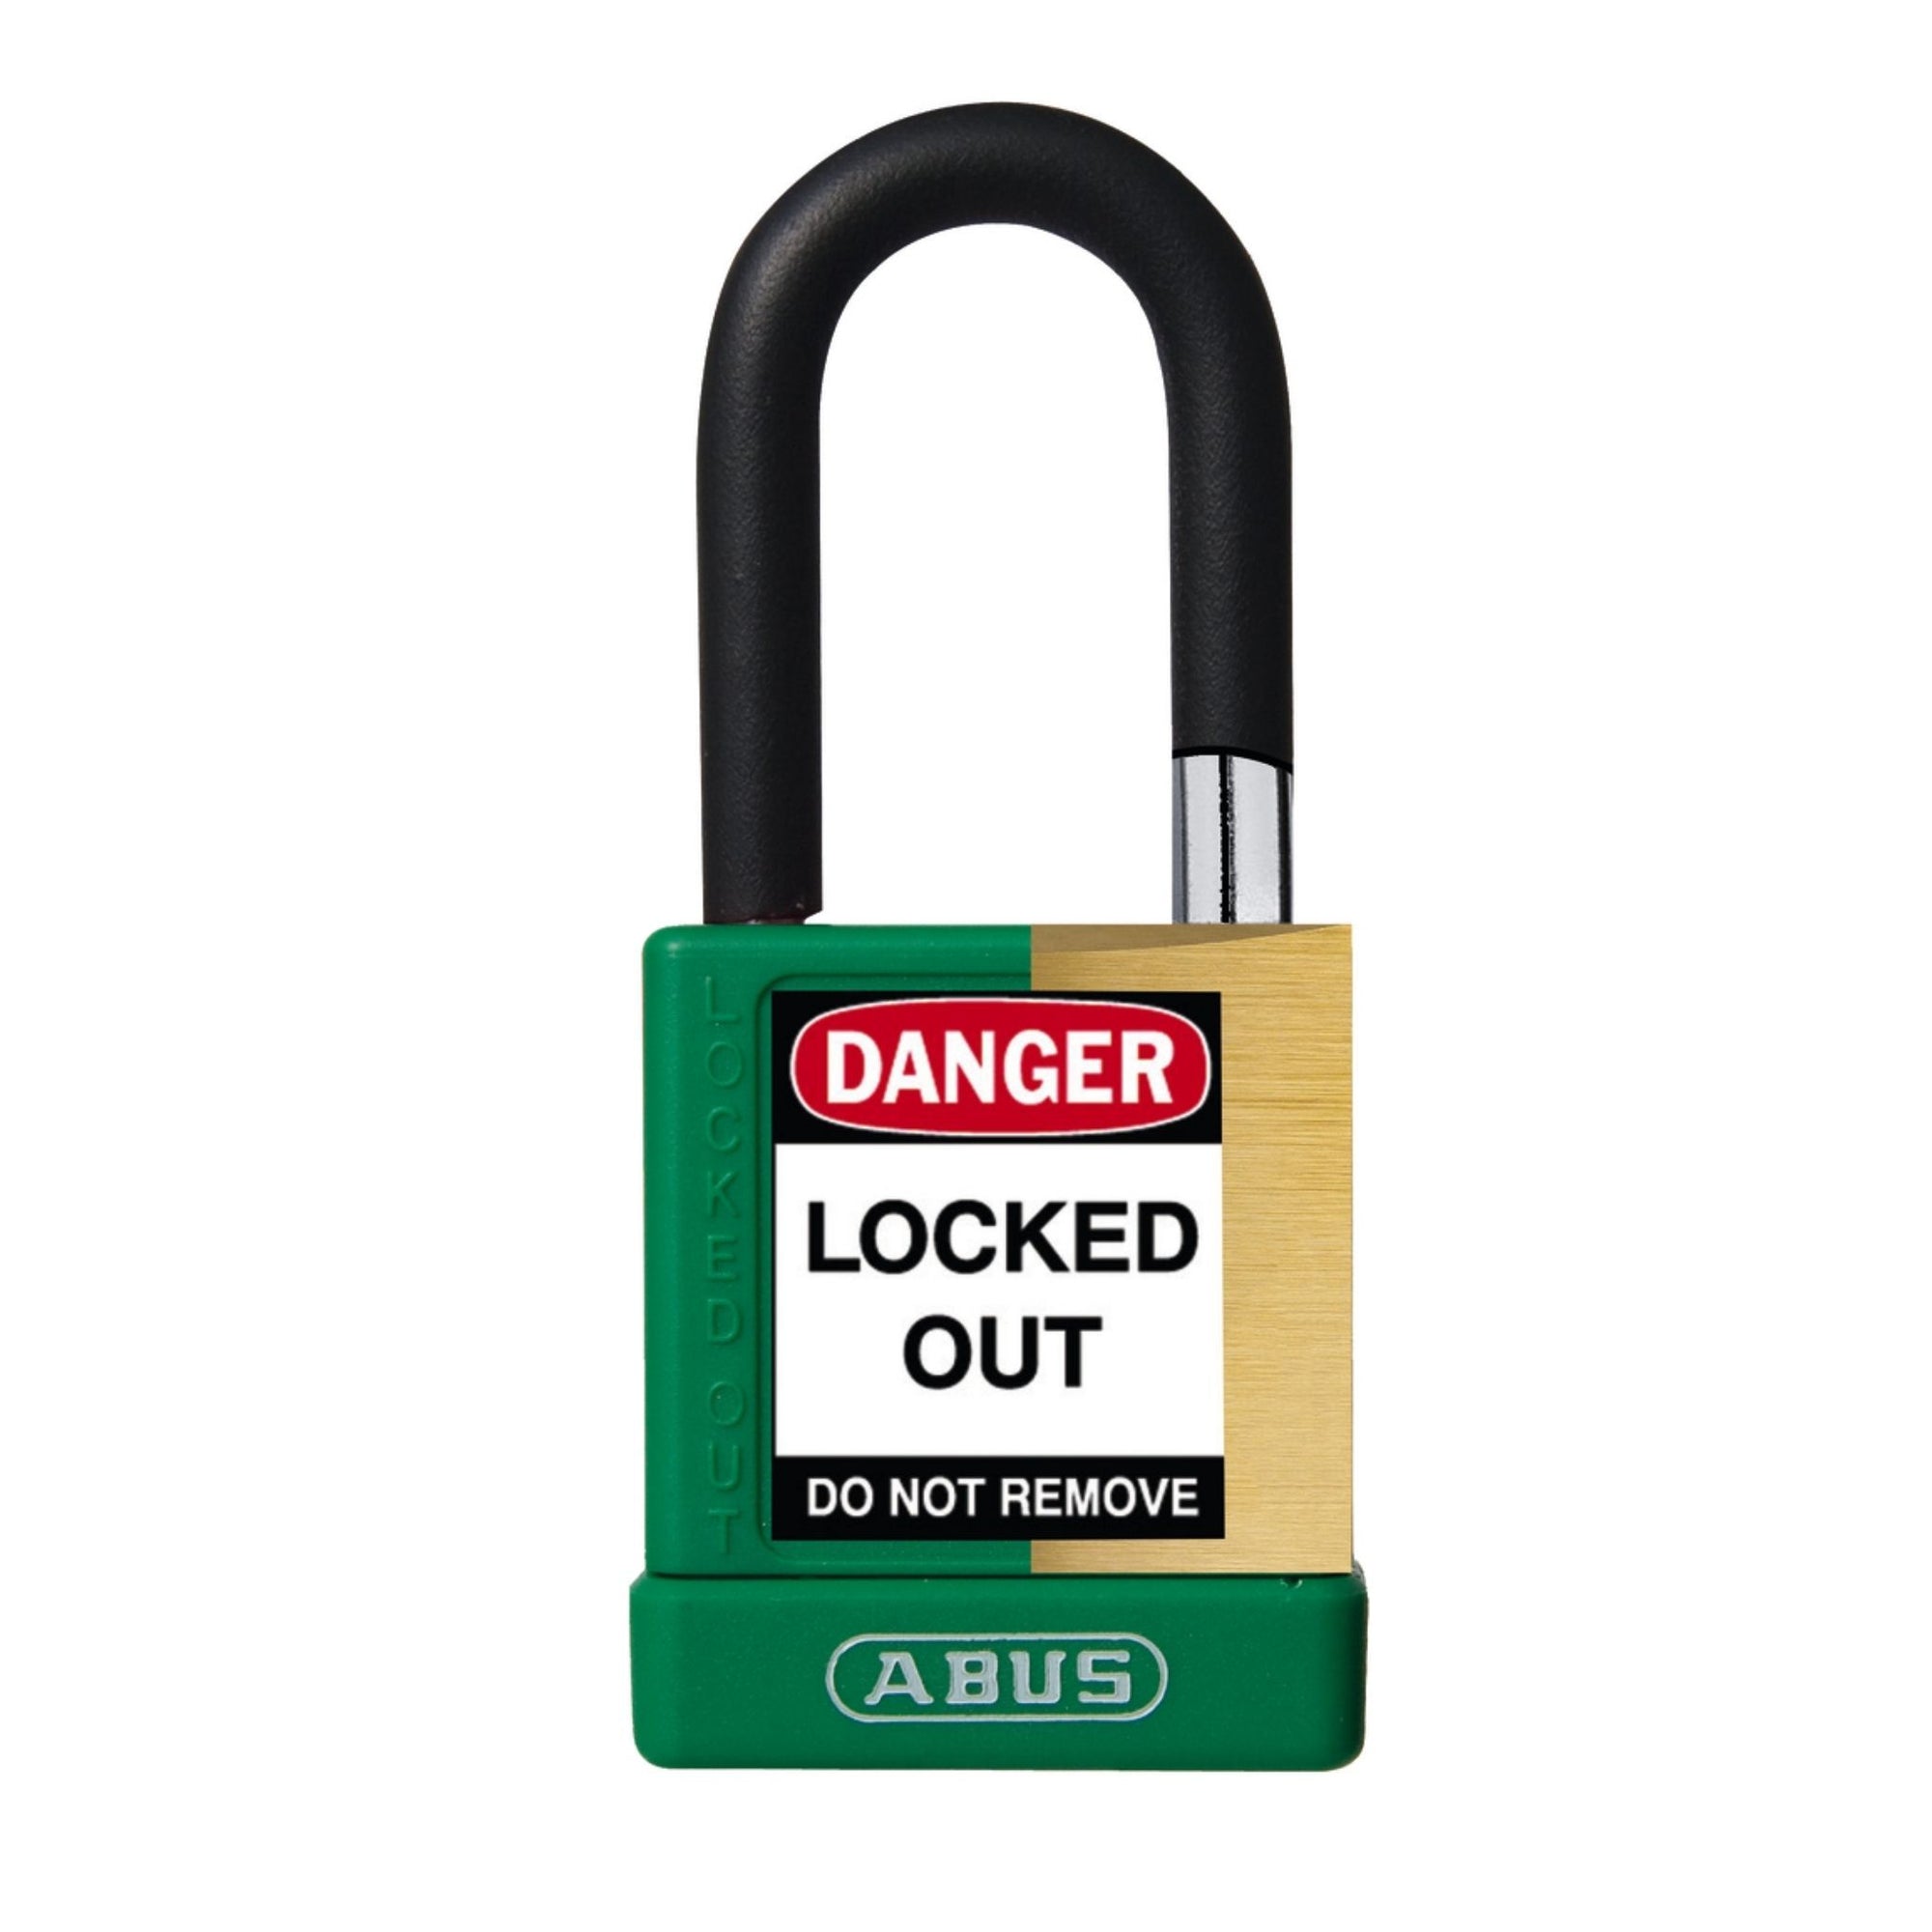 Abus 74M/40 KA Green Insulated Brass Safety Padlock with 1-1/2" Shackle - The Lock Source